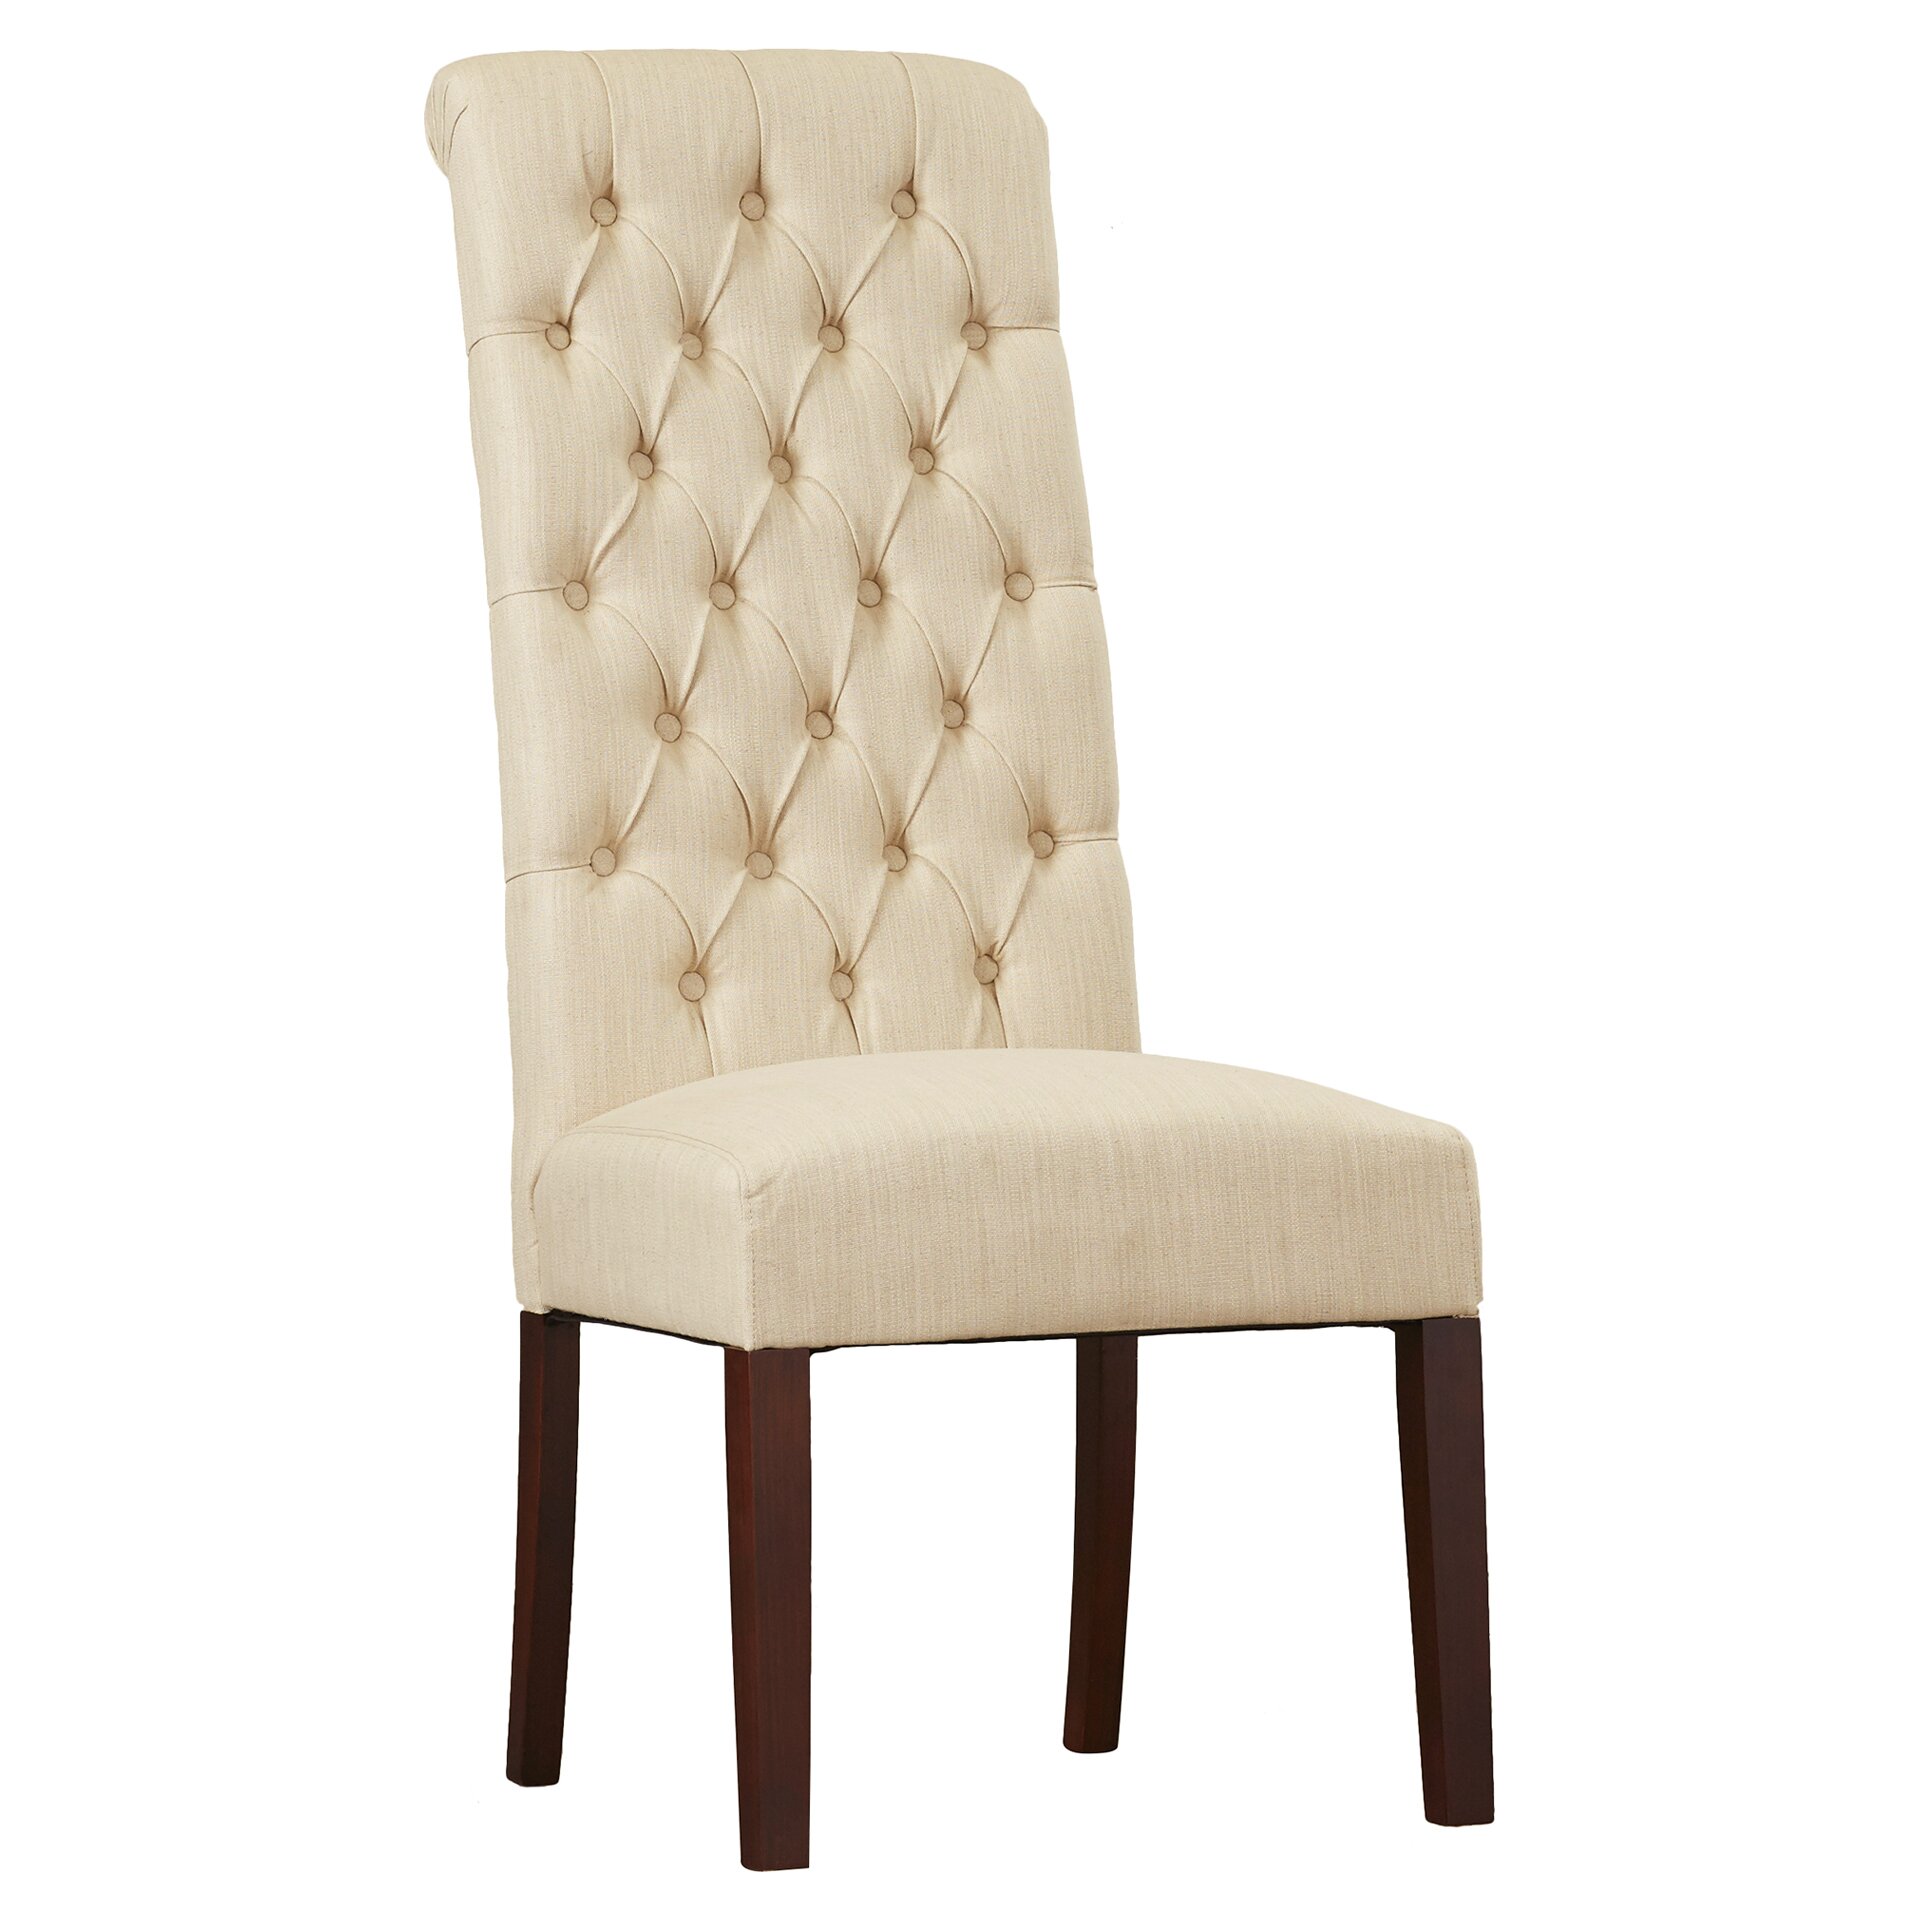 Charlton Home Estbury Tall Tufted Upholstered Dining Chair & Reviews